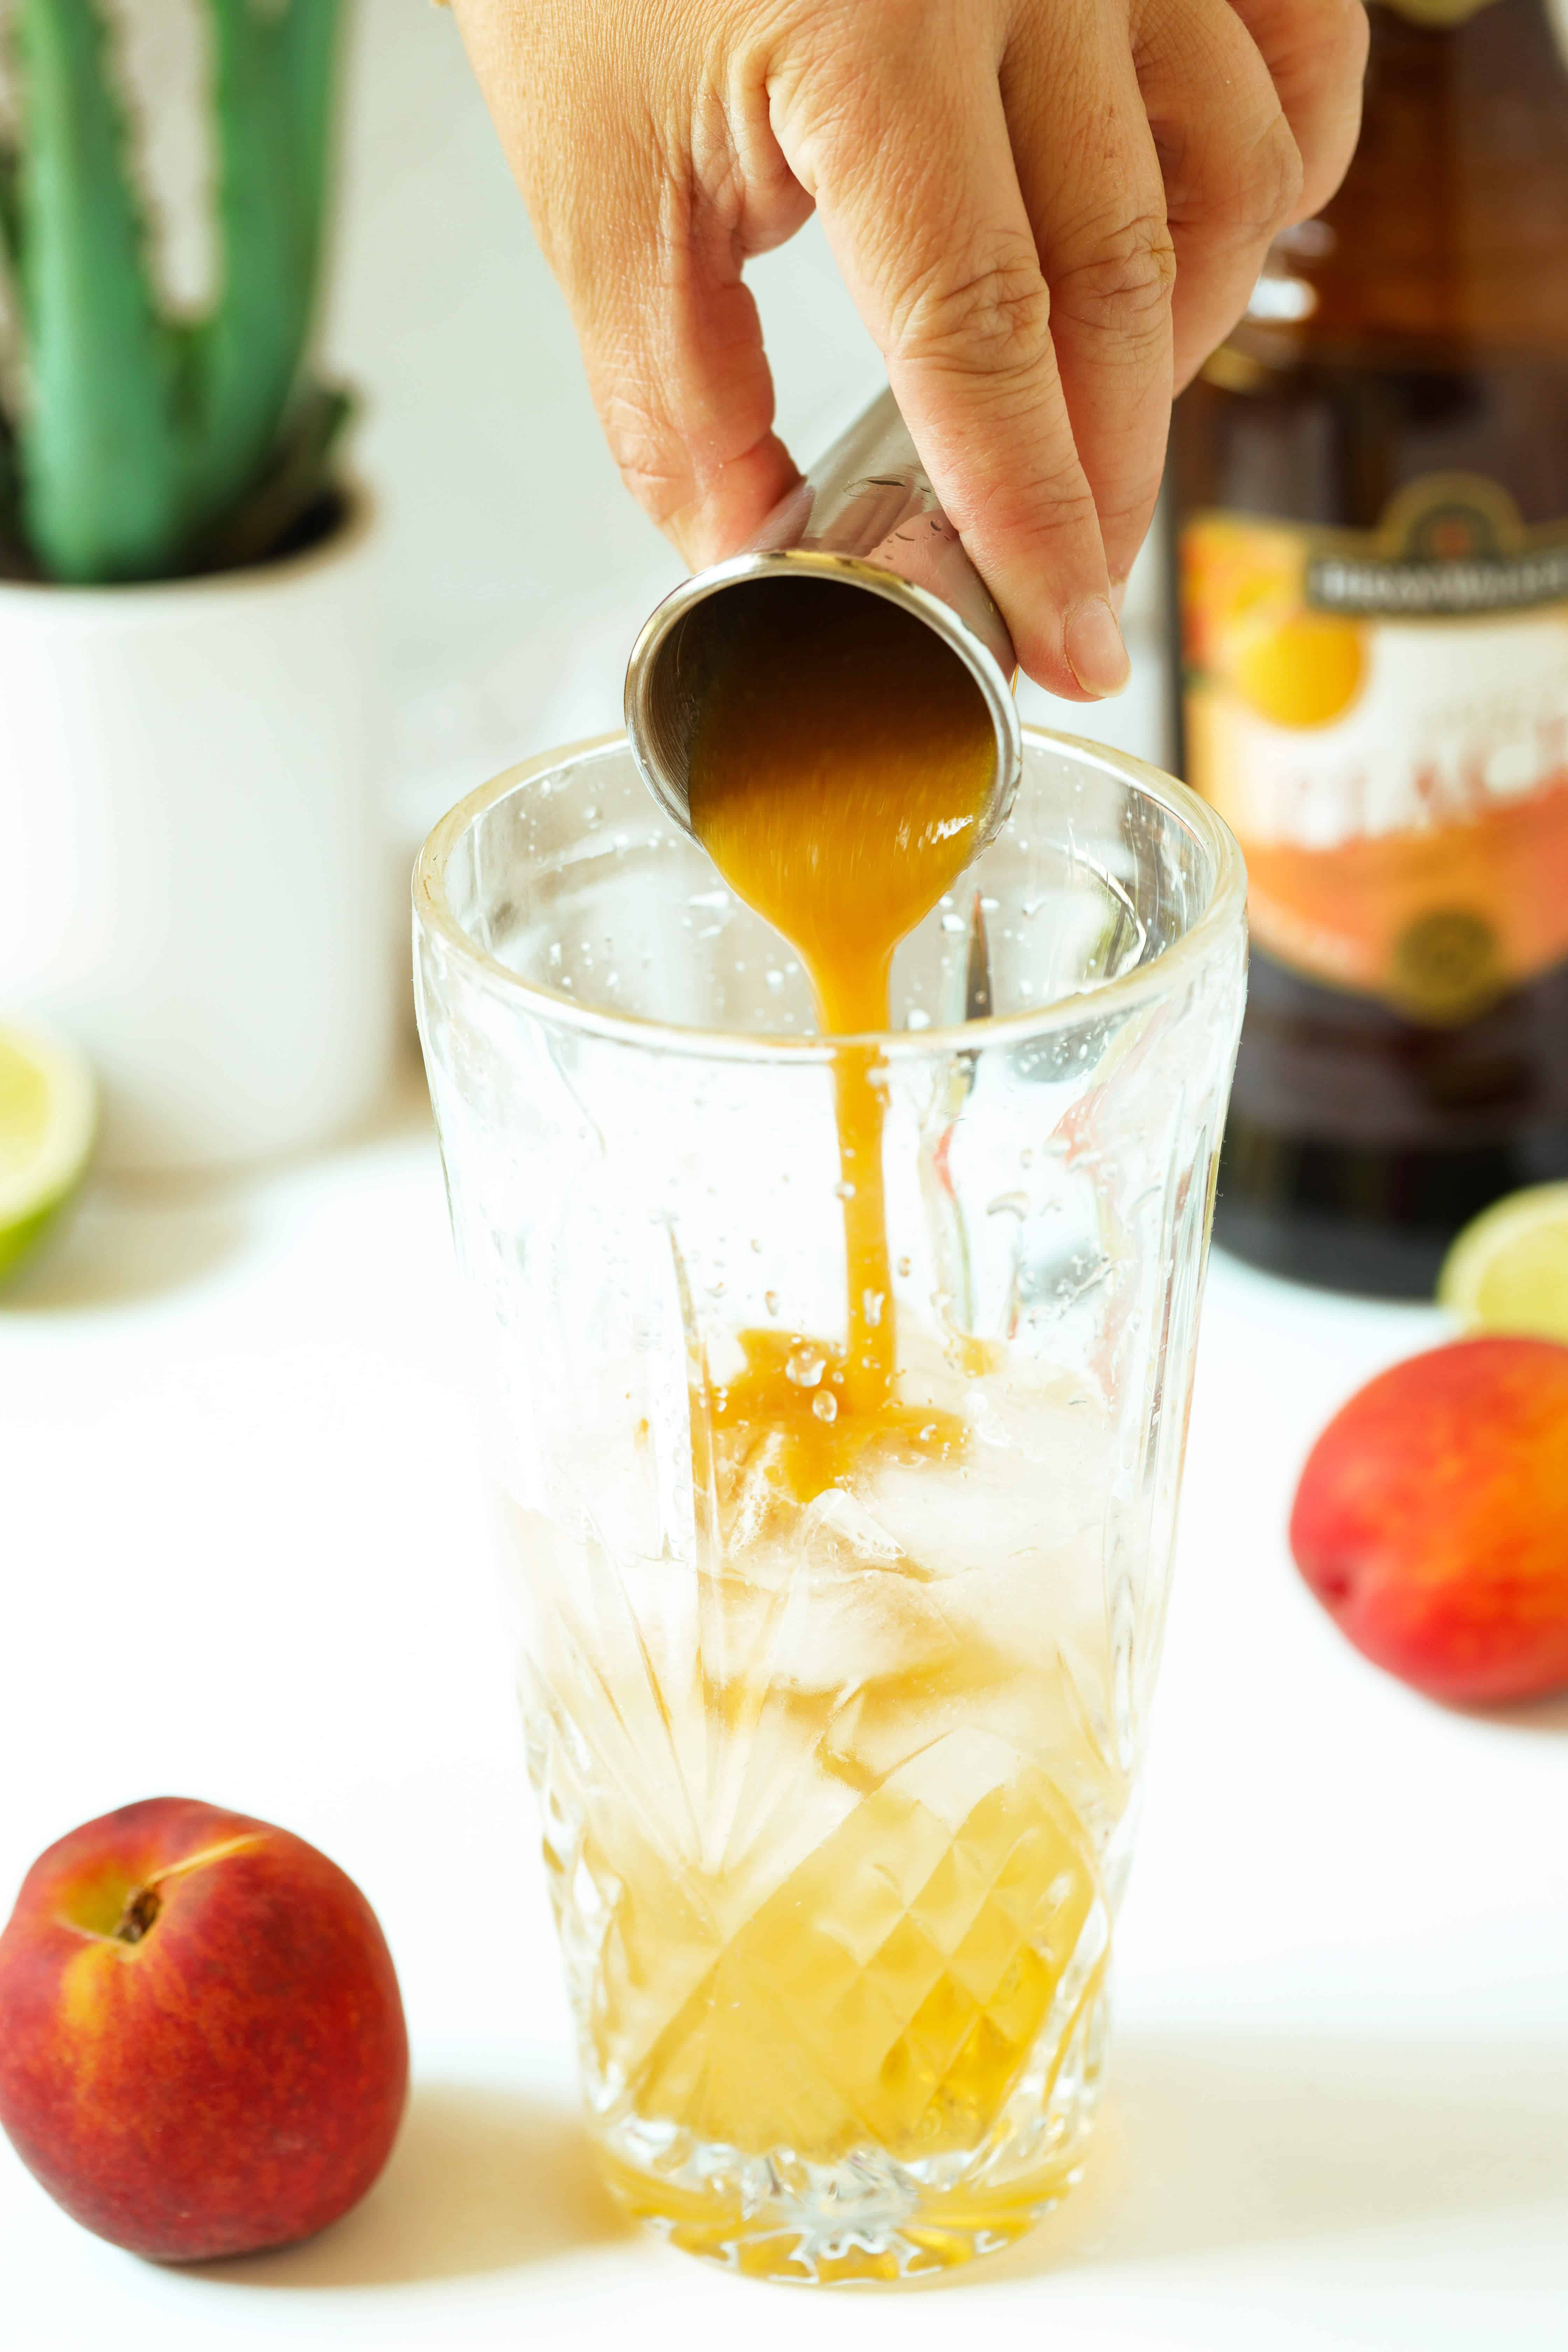 Peach purée being poured out of a jigger into a cocktail shaker. There is a bottle of peach schnapps, and agave plant, and peaches in the background.